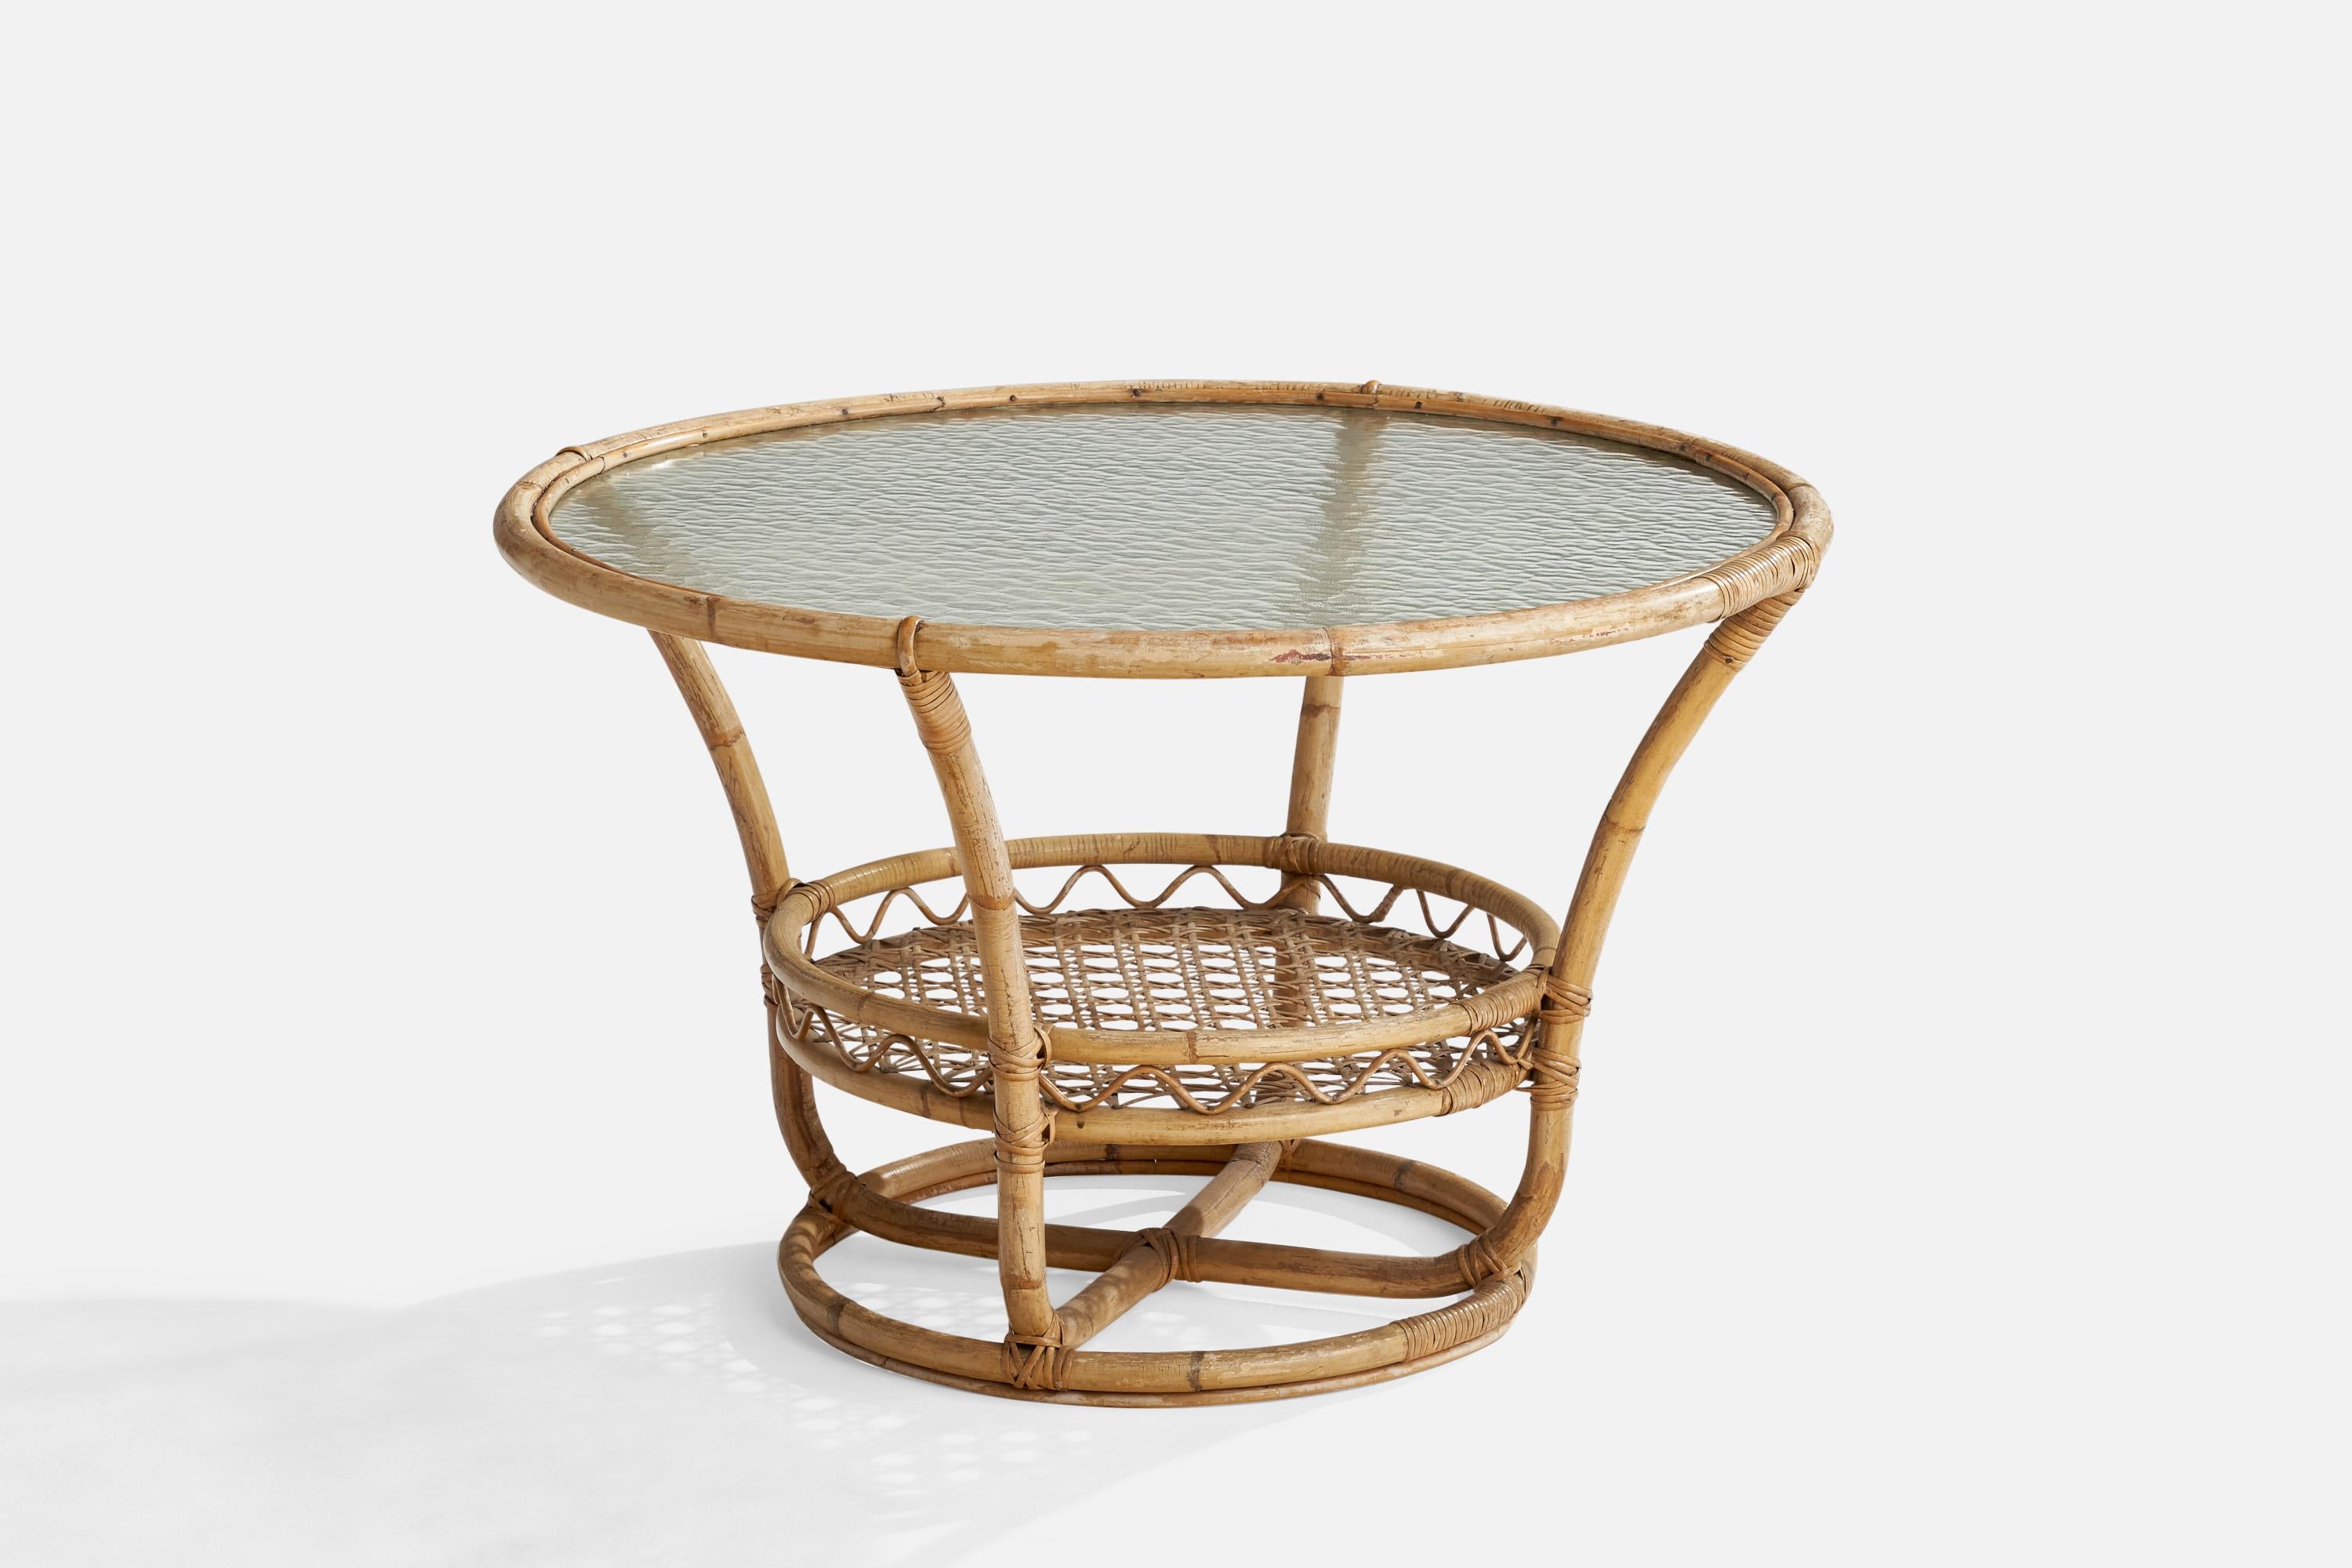 A moulded bamboo, rattan and glass side table designed and produced in Sweden, 1950s.